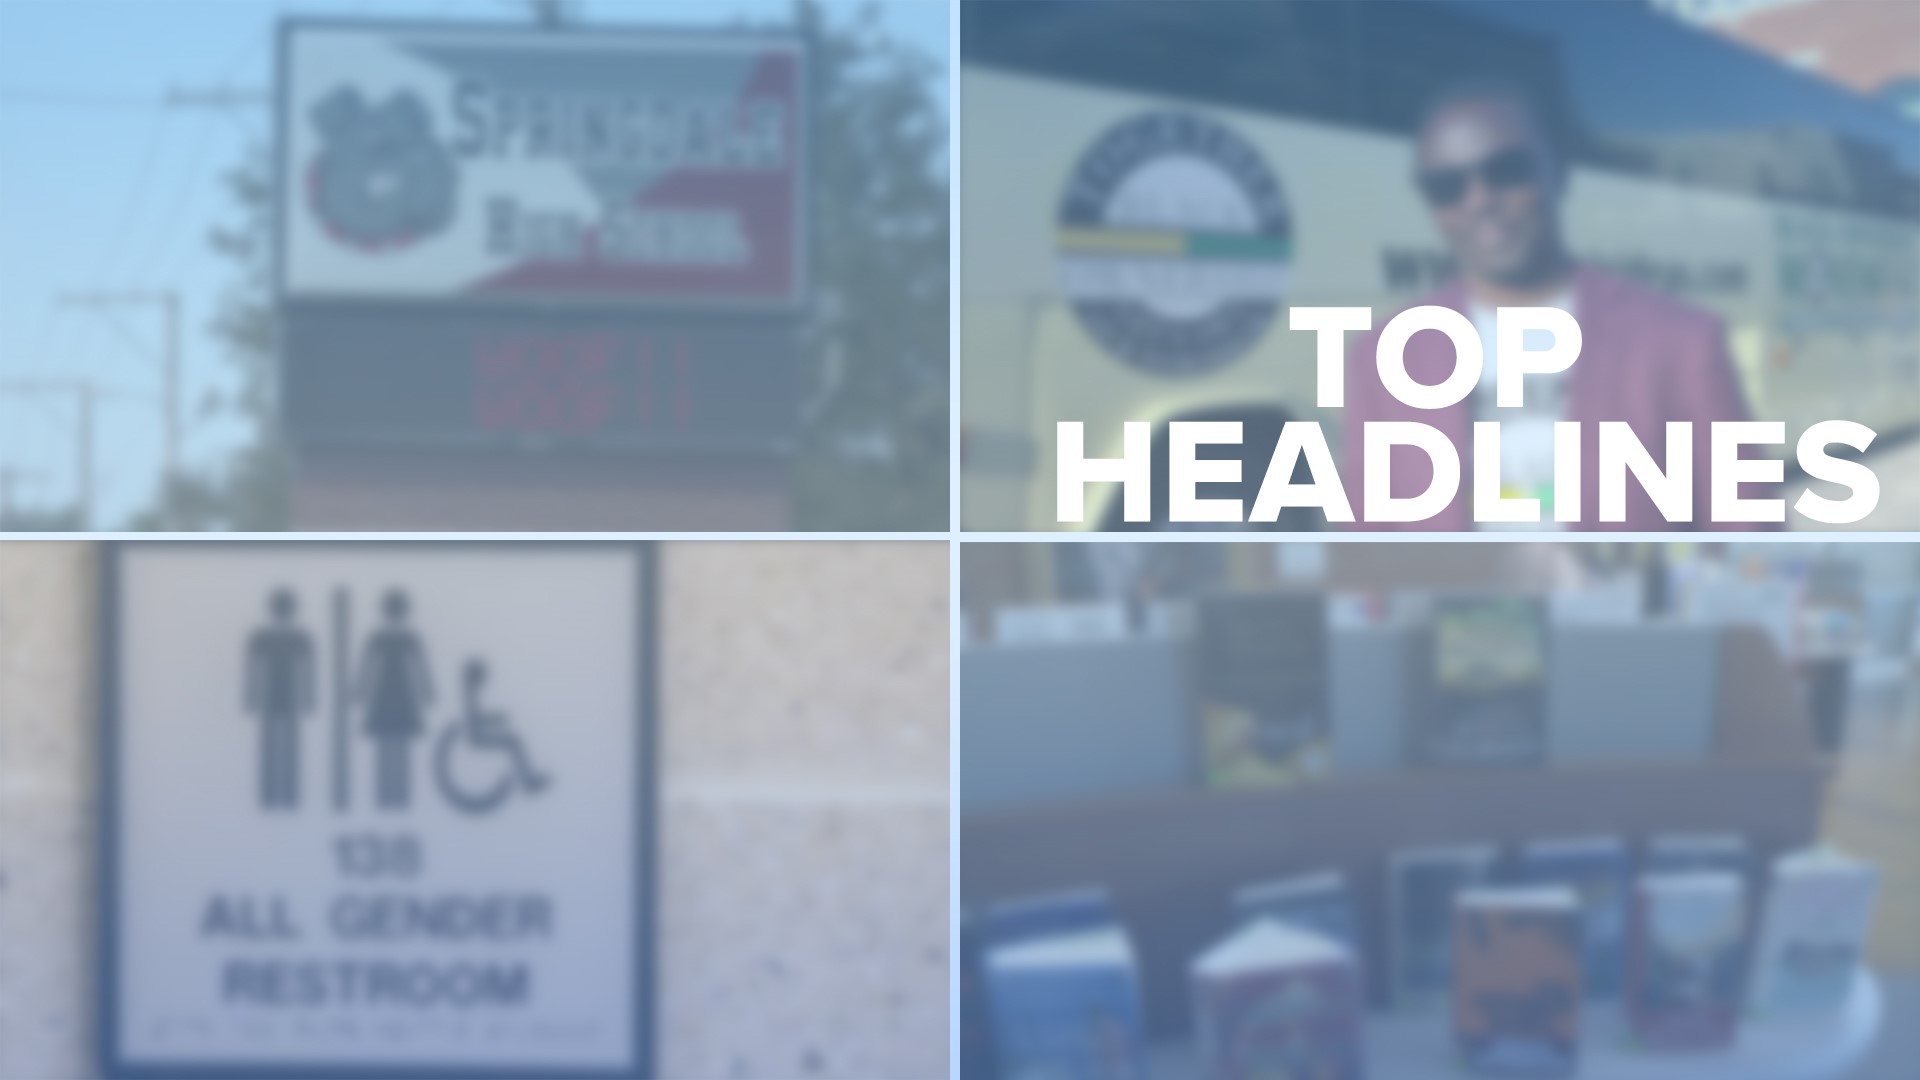 Check out today's top headlines for local news across the area!